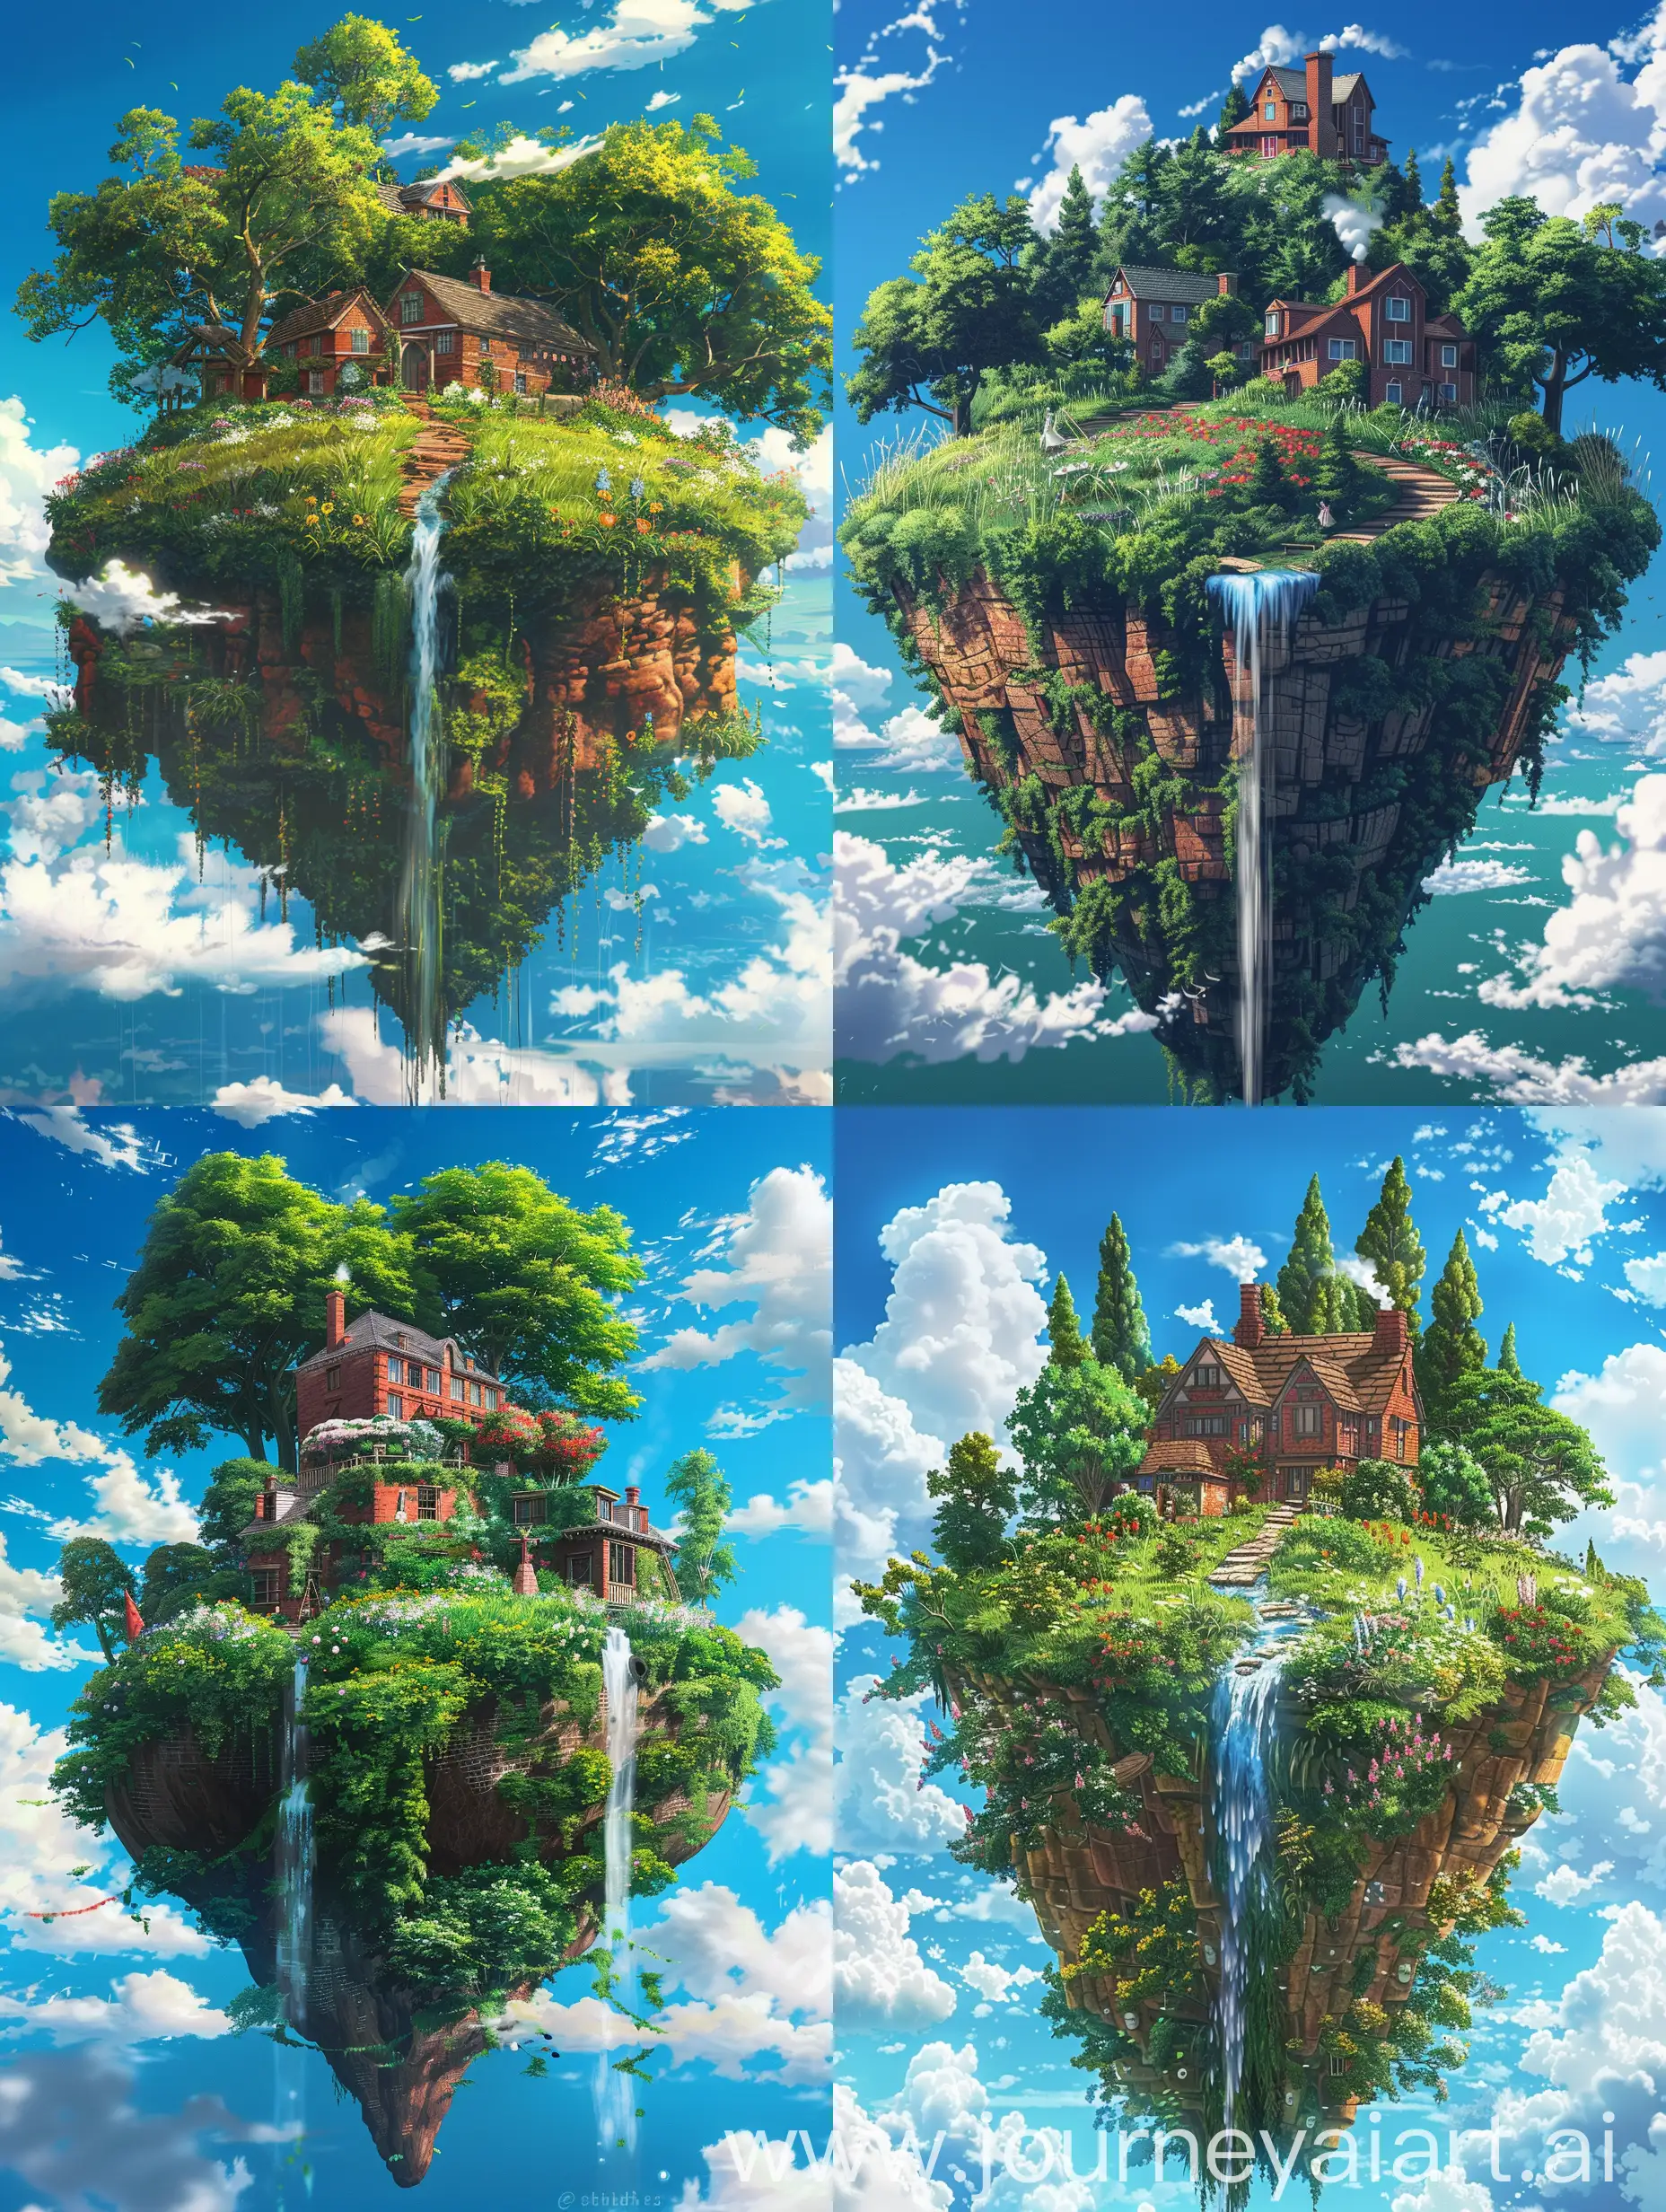 Studio Ghibli anime style,floating island,on top is a huge Trees and a red bricks houses,pathway,flowers, high grasses,falls,wide angle,aerial view,fluffy white clouds,vivid blue sky.